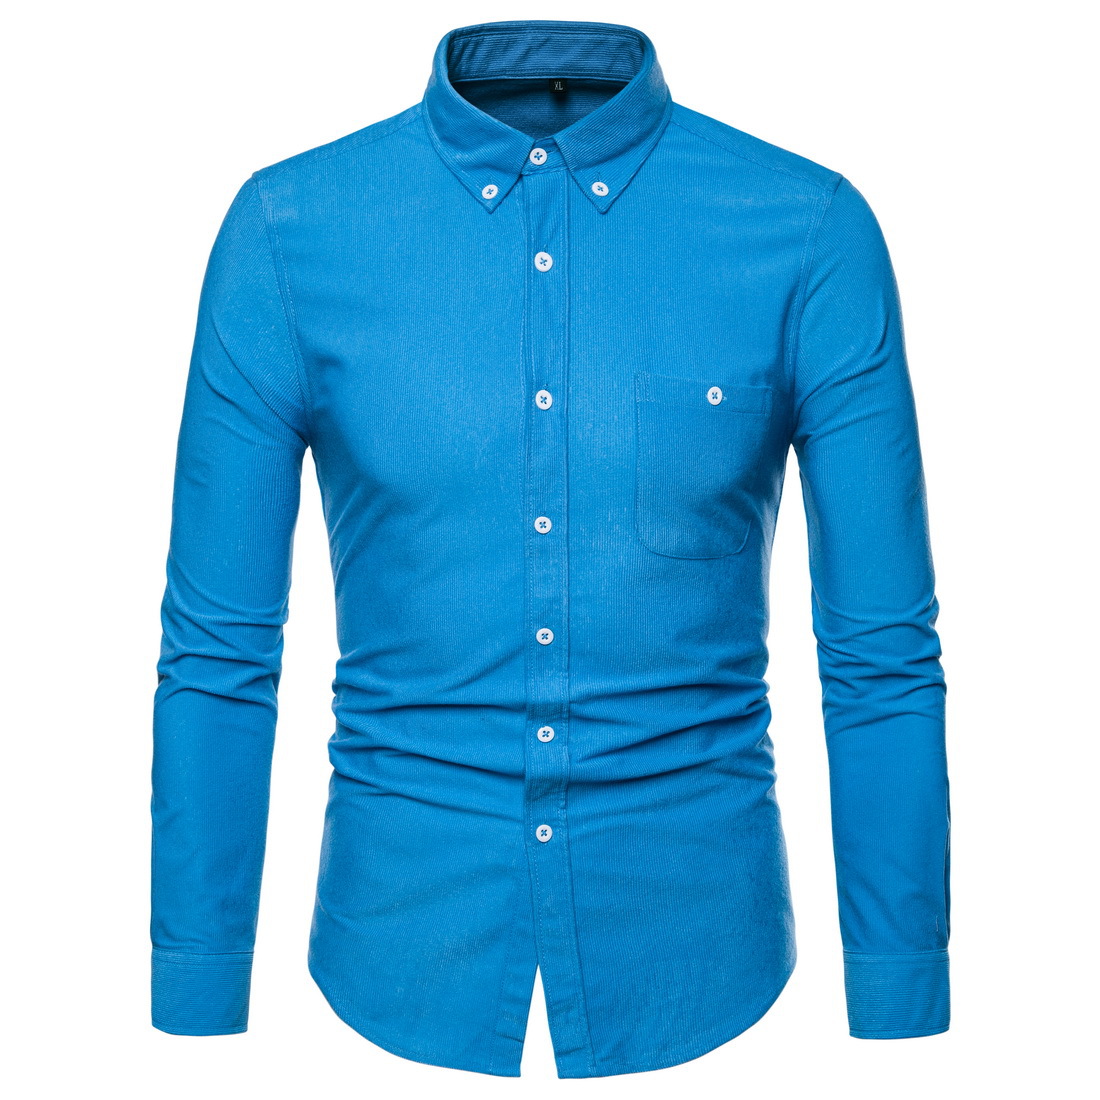 Men Shirt Spring Autumn Corduroy Long Sleeve Single Breasted Casual Slim Fit Plus Size Shirt sky blue